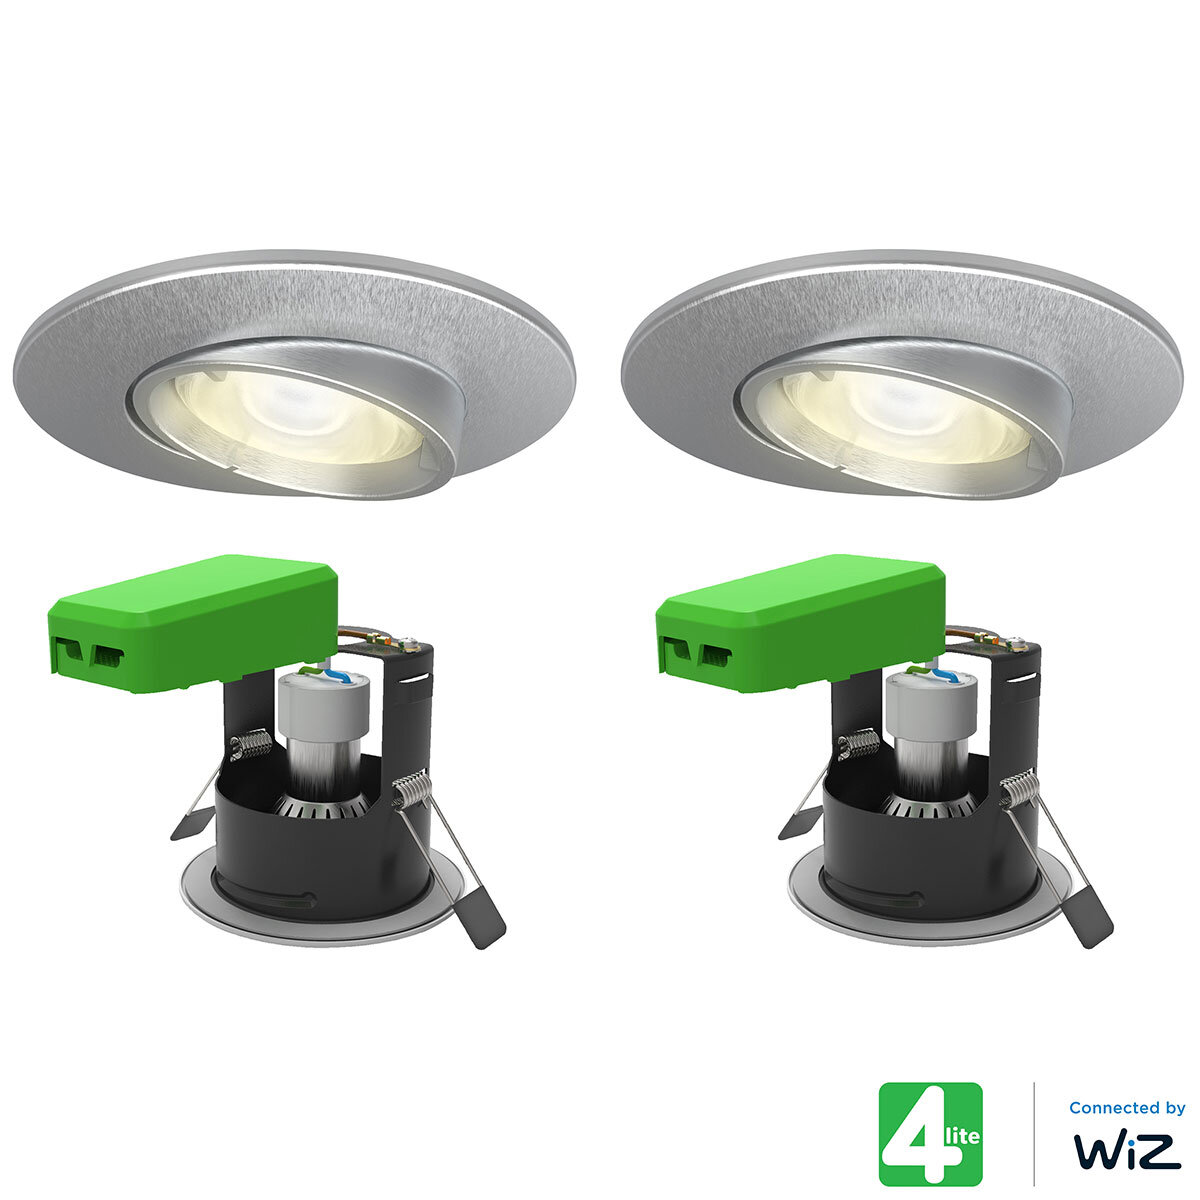 4lite WiZ Connected LED IP20 Fire Rated Adjustable Downlight, Pack of 2, in Satin Chrome